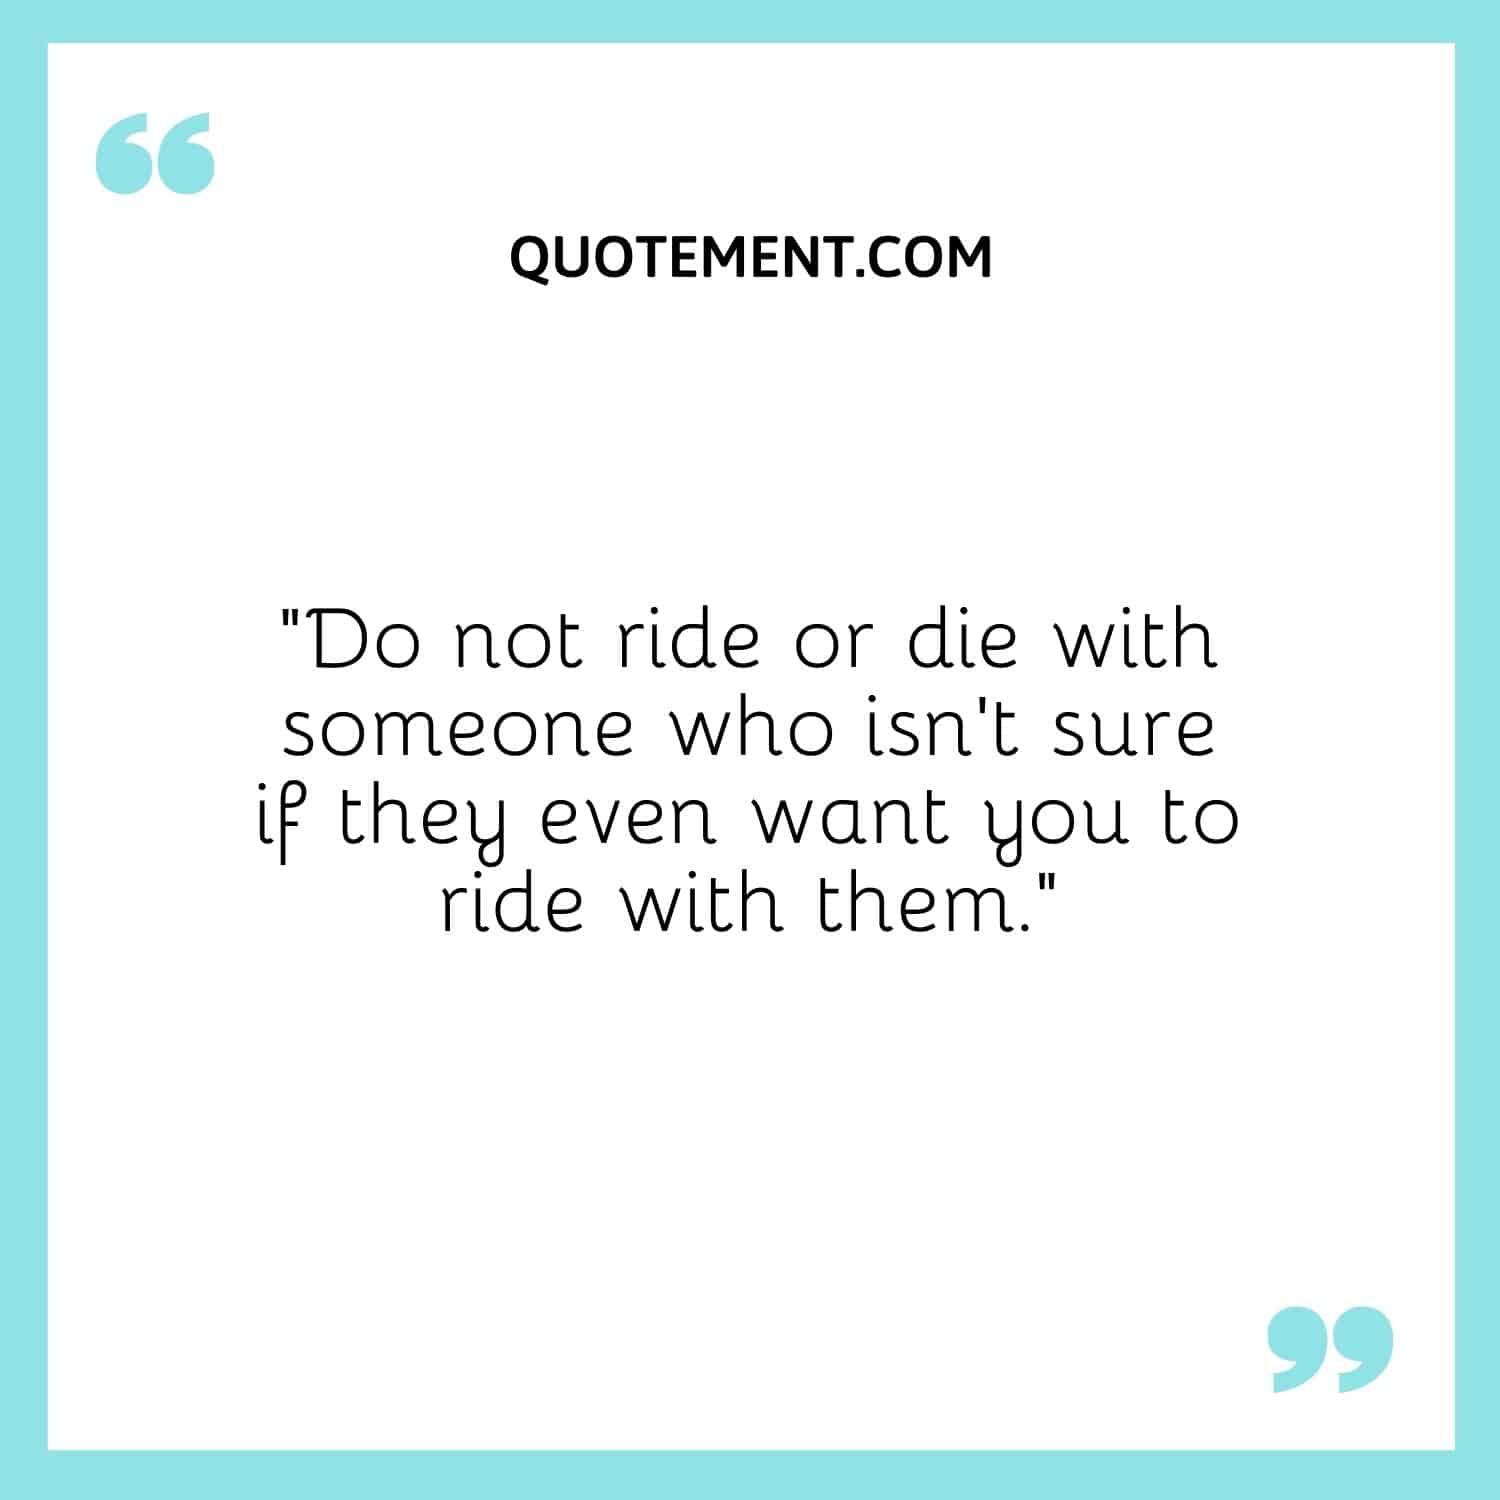 Do not ride or die with someone who isn't sure if they even want you to ride with them.